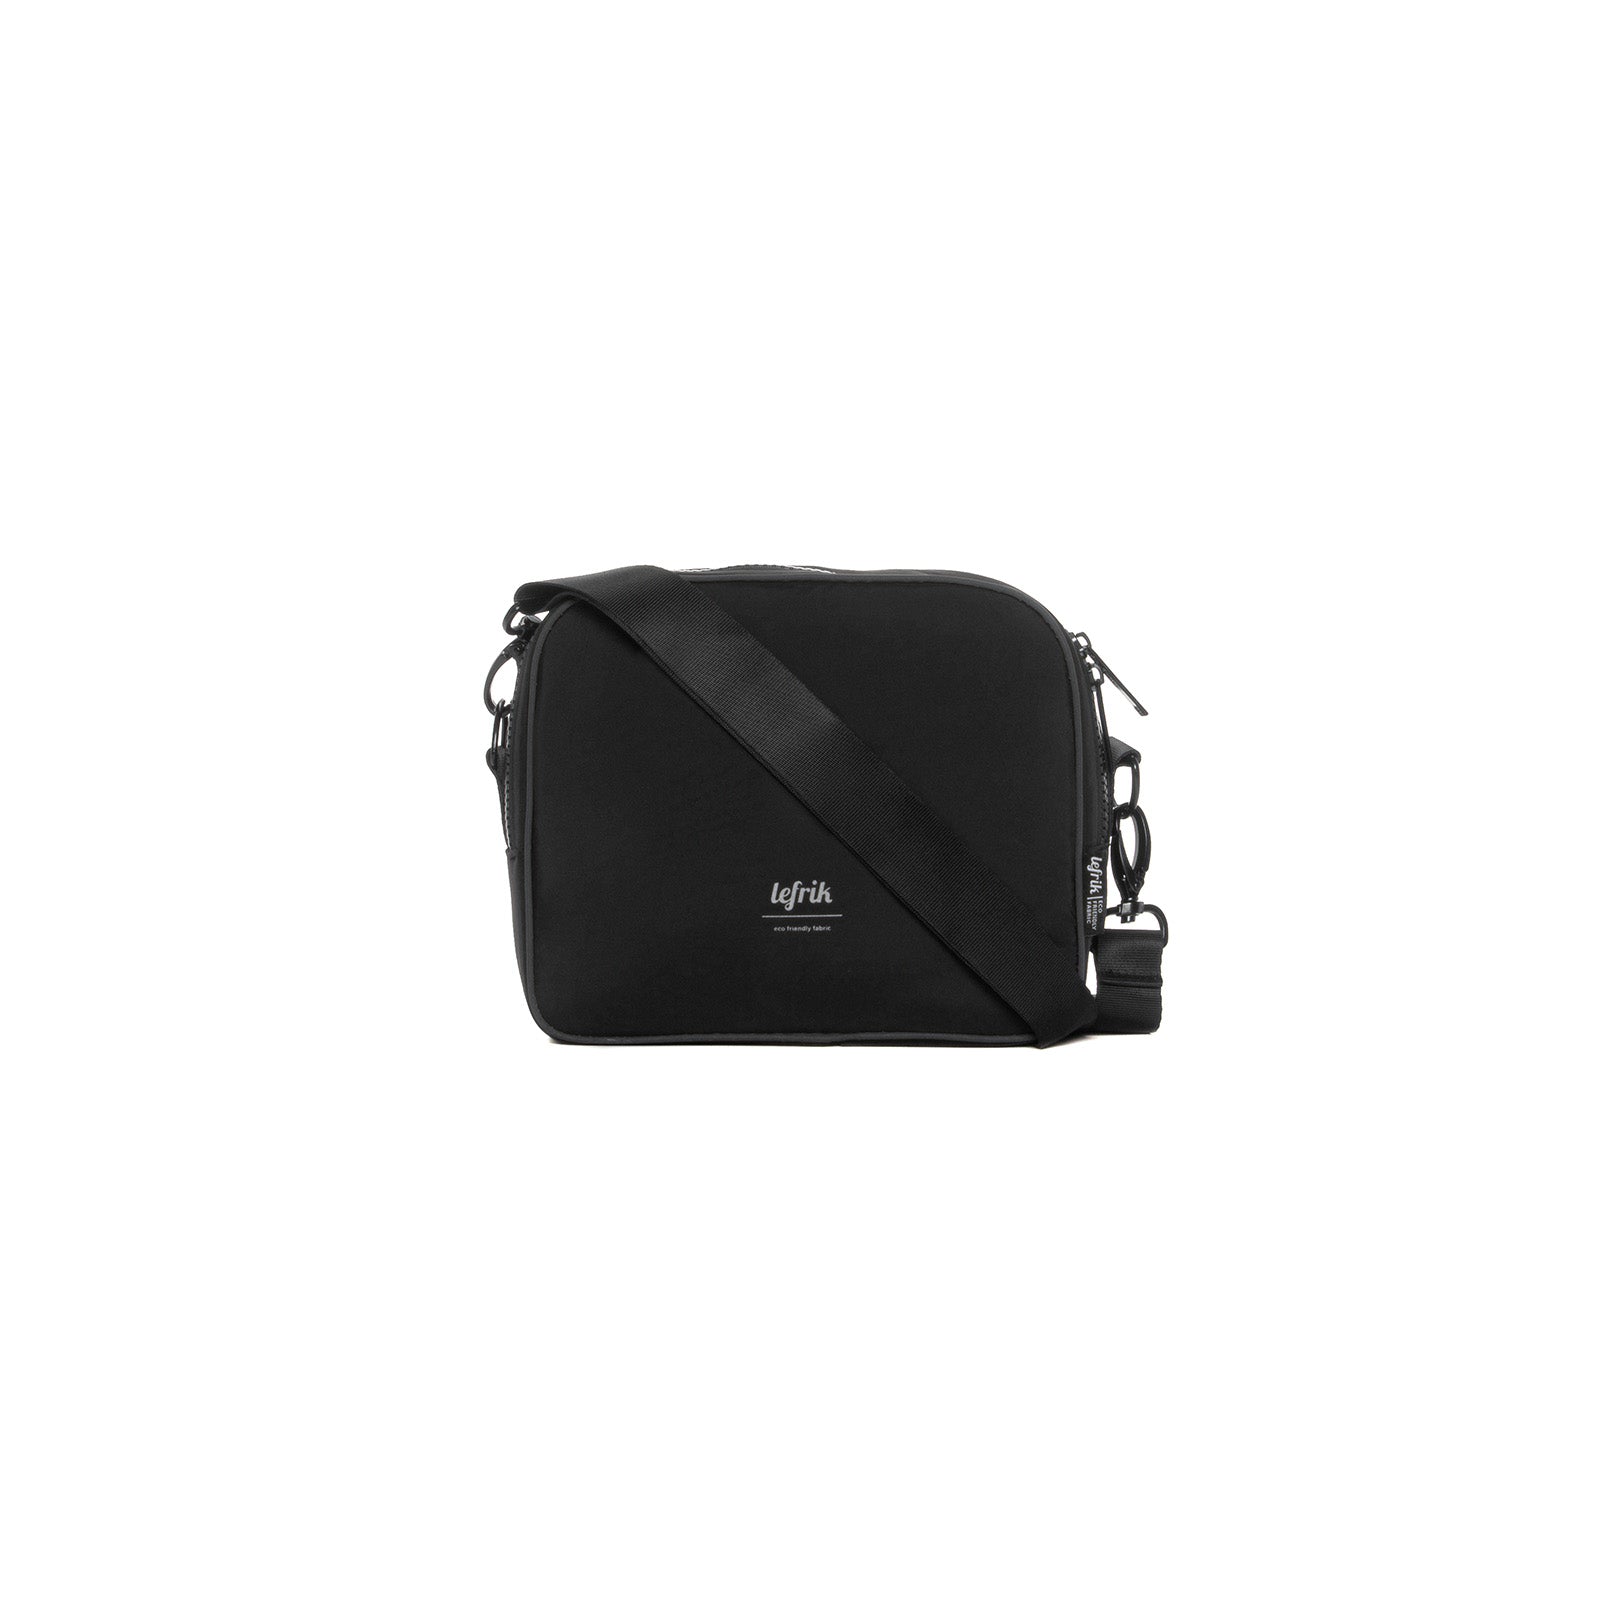 Black crossbody bag Tokay Tech (2.5l) made from recycled PET plastic bottles from Lefrik